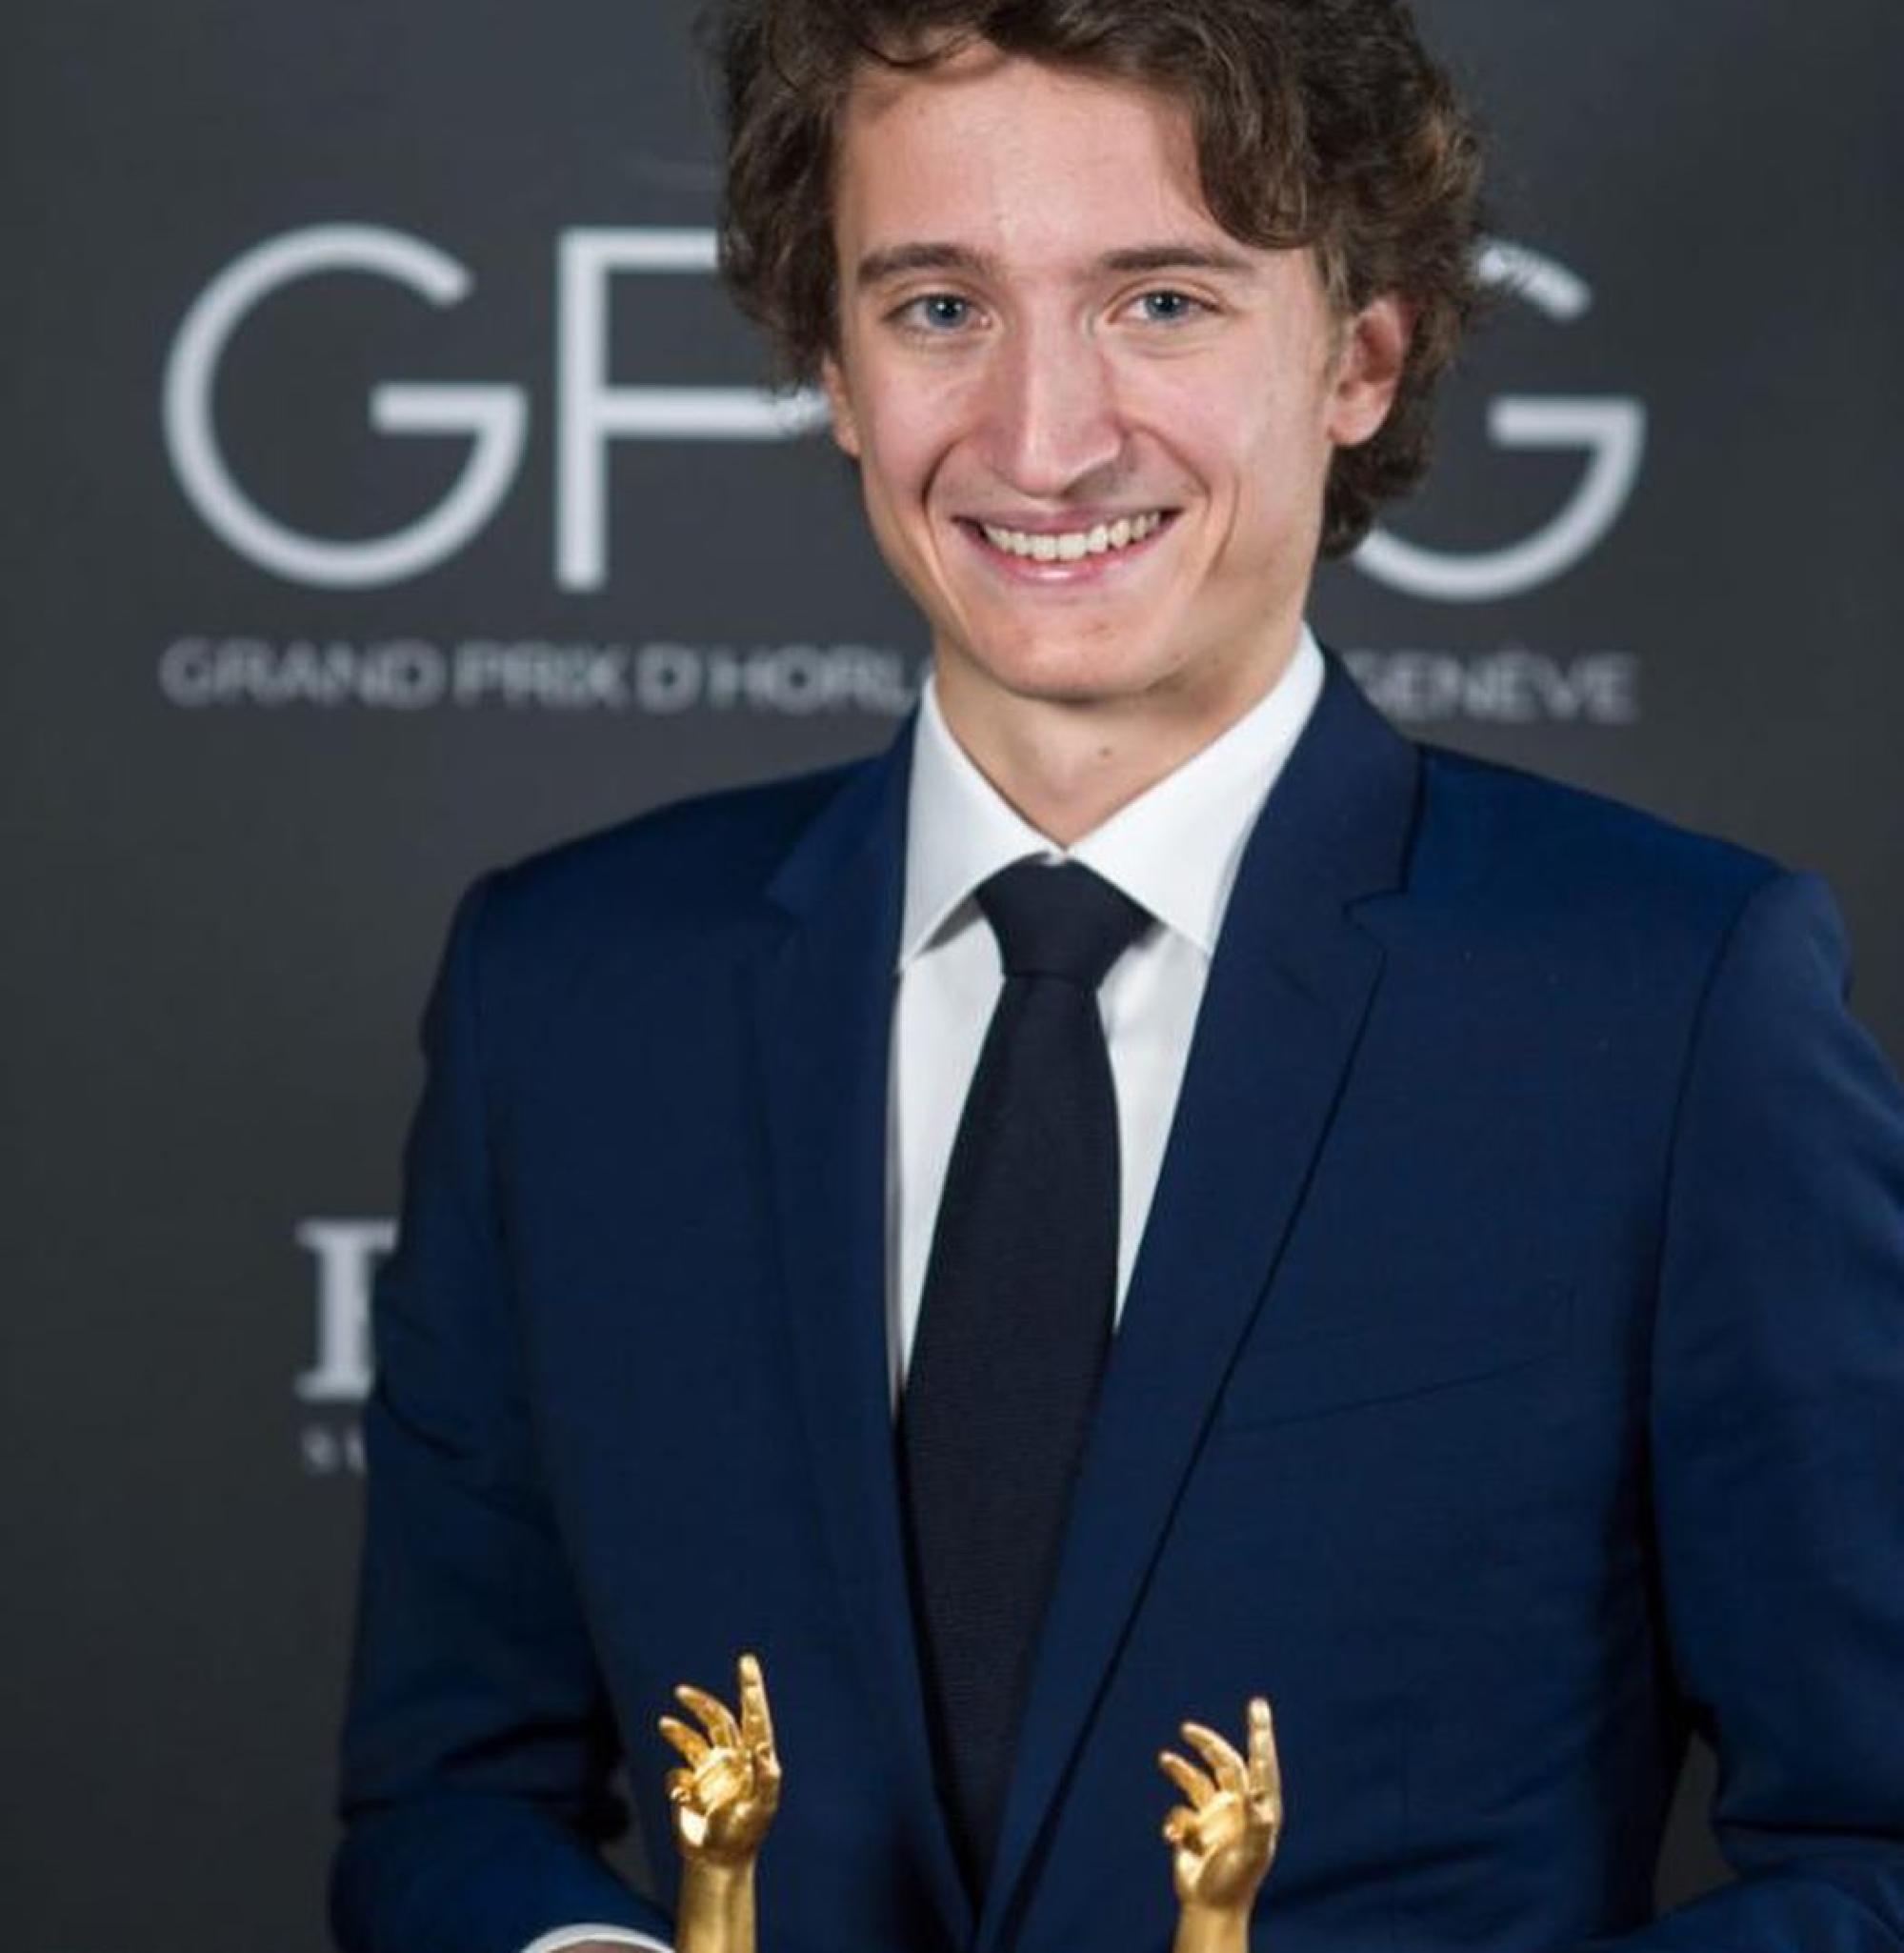 Meet Jean Arnault, Bernard Arnault's youngest LVMH heir: the MIT graduate  runs Louis Vuitton watches, did work experience at McLaren Racing, and was  inspired by his Tag Heuer CEO brother Frédéric